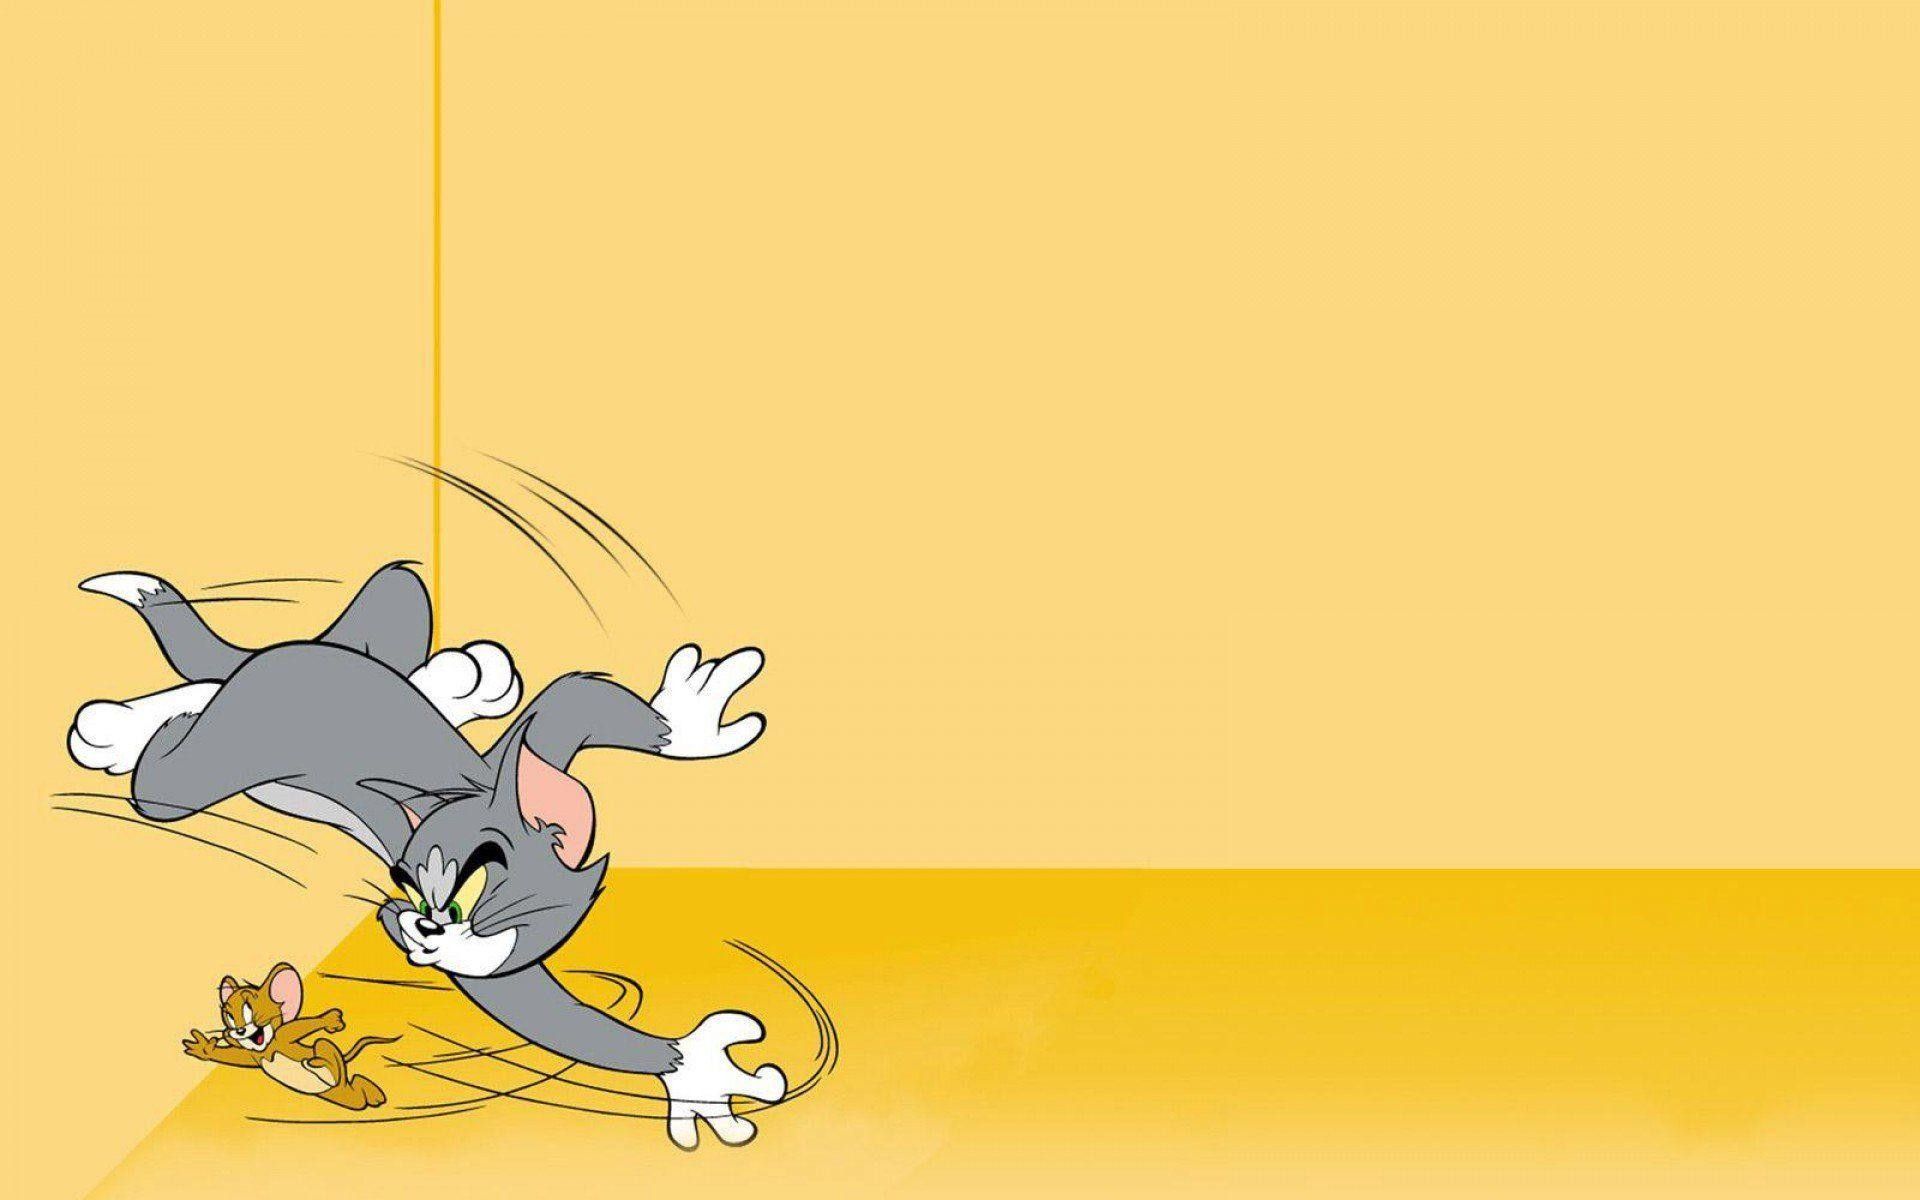 Aesthetic Tom And Jerry Wallpapers - Wallpaper Cave